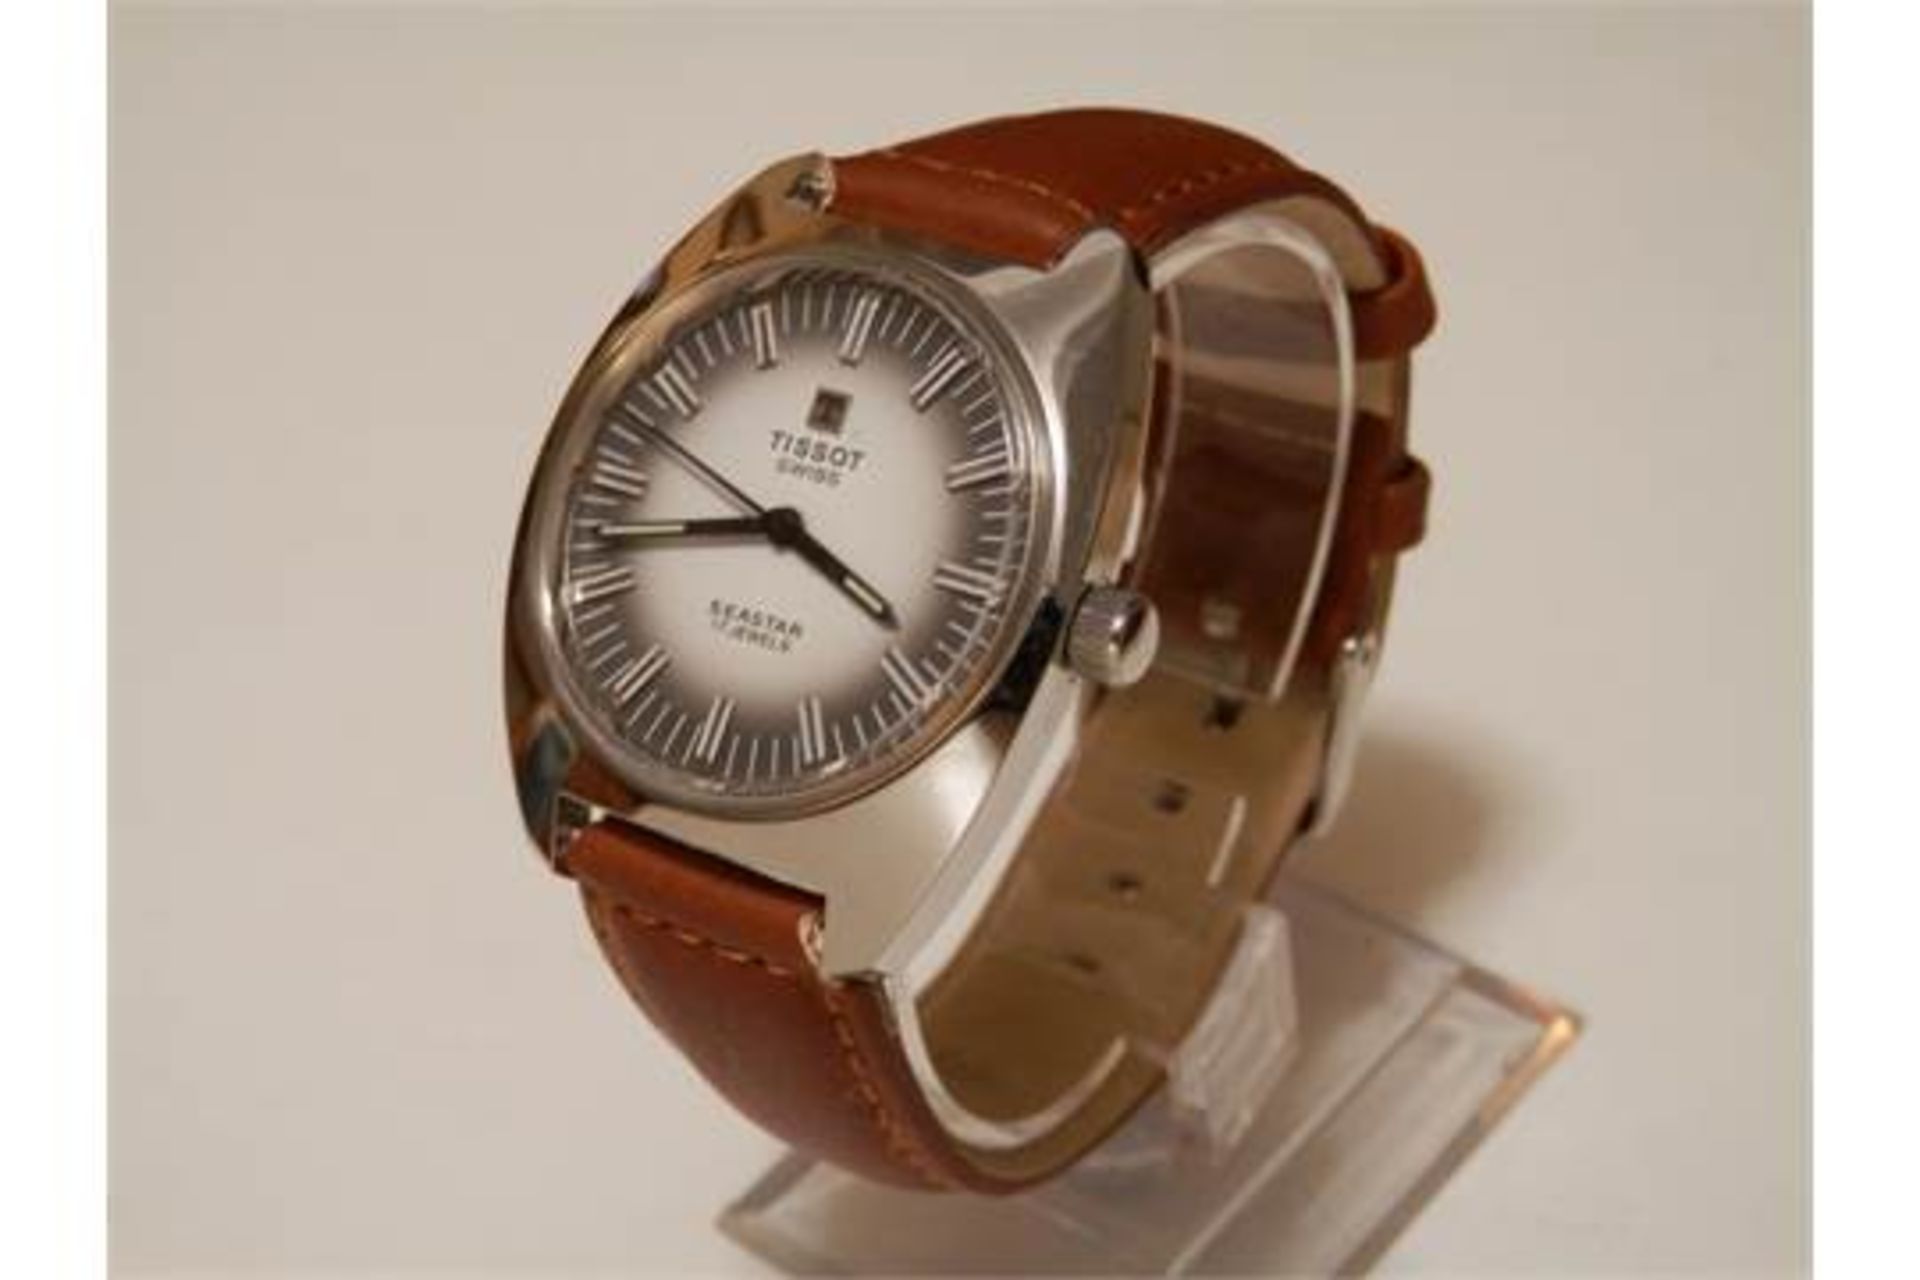 SUPERB GENTS TISSOT SEASTAR, POSSIBLY NEW/OLD STOCK 1970S 17 JEWEL SWISS WATCH (1 of 3 available) - Image 2 of 10